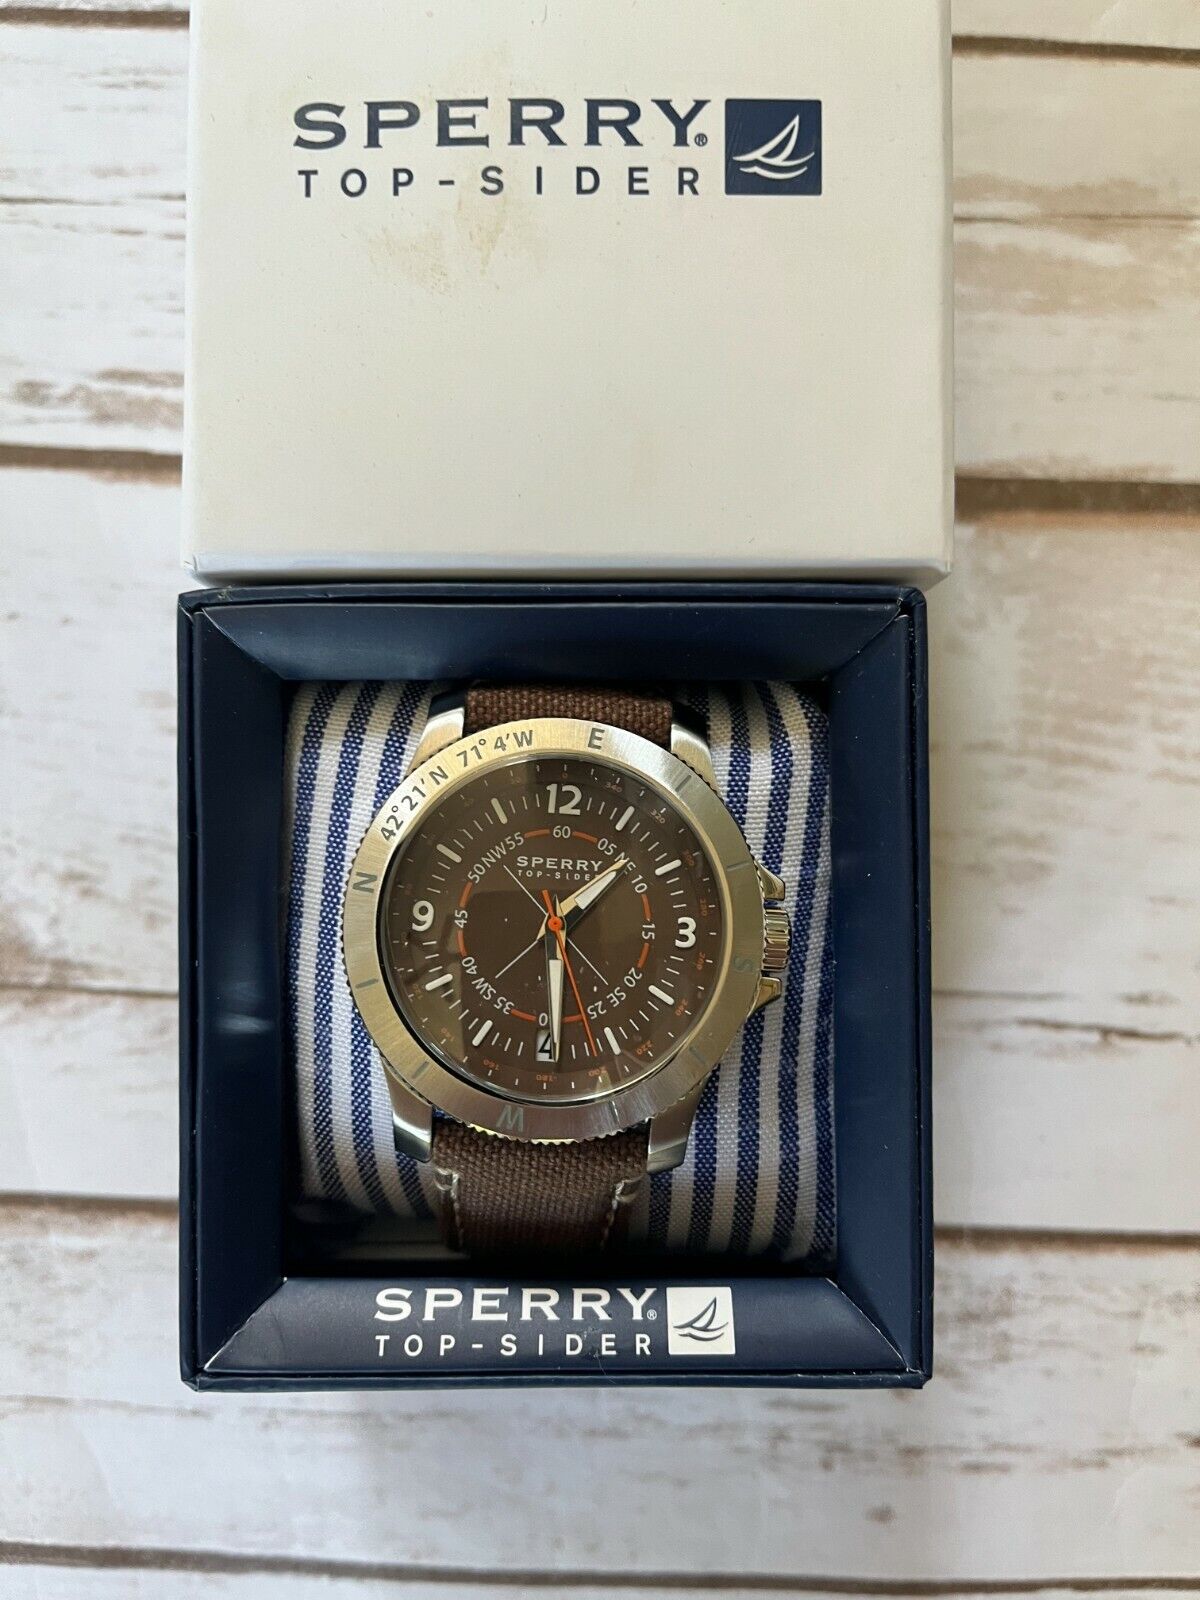 SPERRY TOP SIDER EXPLORER LEATHER STRAP WATCH 43MM BROWN SILVER MENS NEW $150